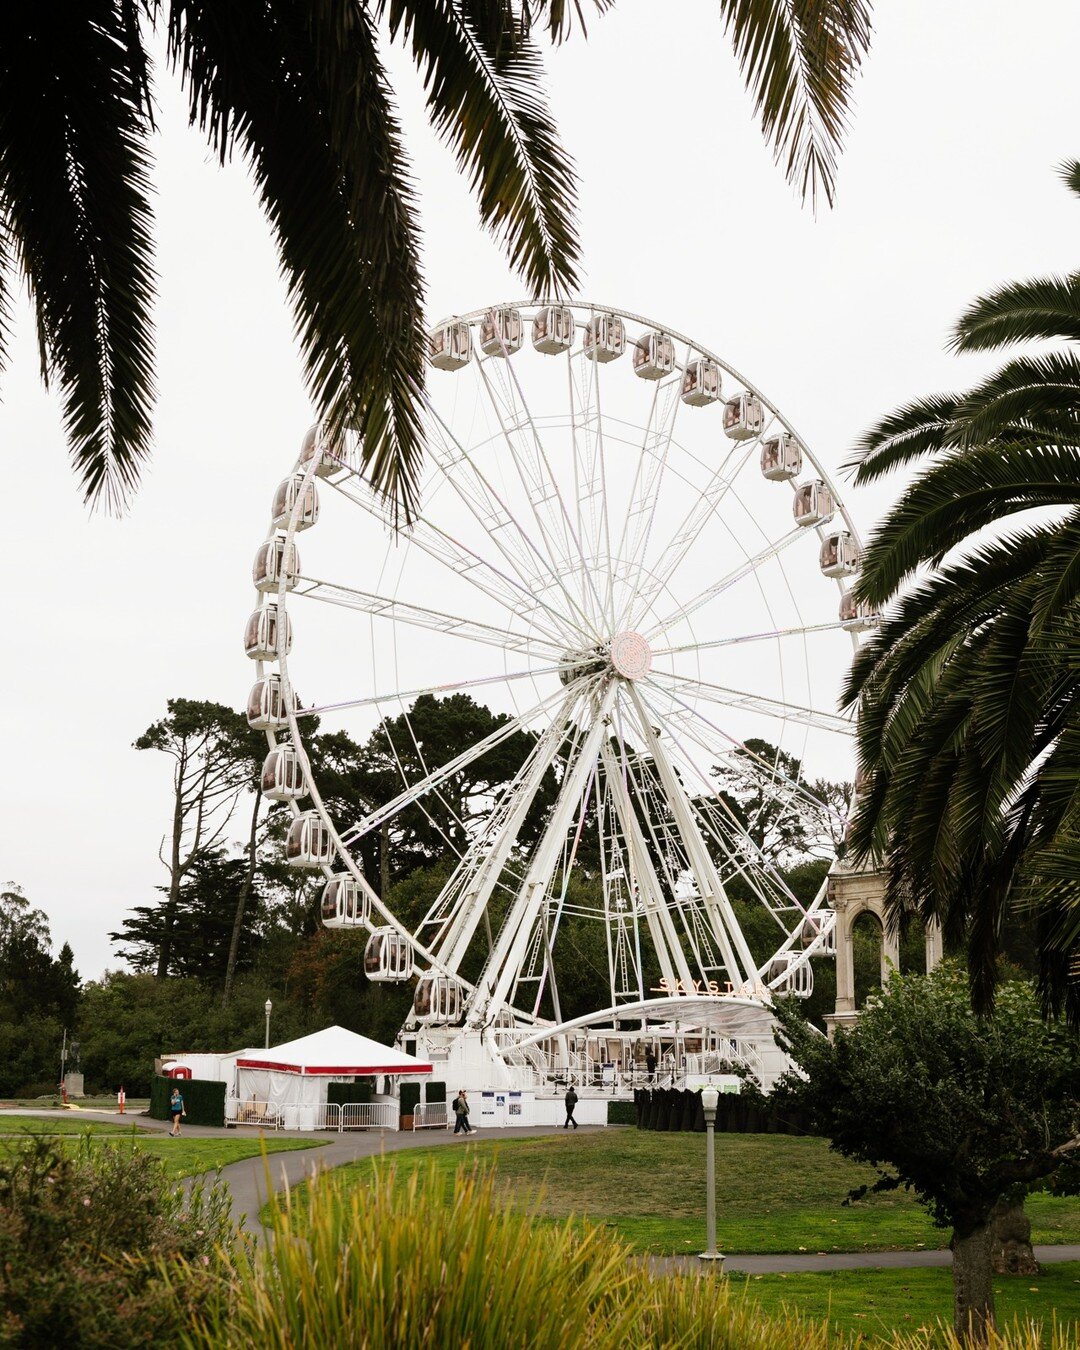 Was stopped in my tracks by the SkyStar ferris wheel in Golden Gate Park last weekend. I knew of it (and then, to be honest, kinda forgot about it), but seeing it in person was incredible and surprisingly joyful. It shot up to the top of my list of t